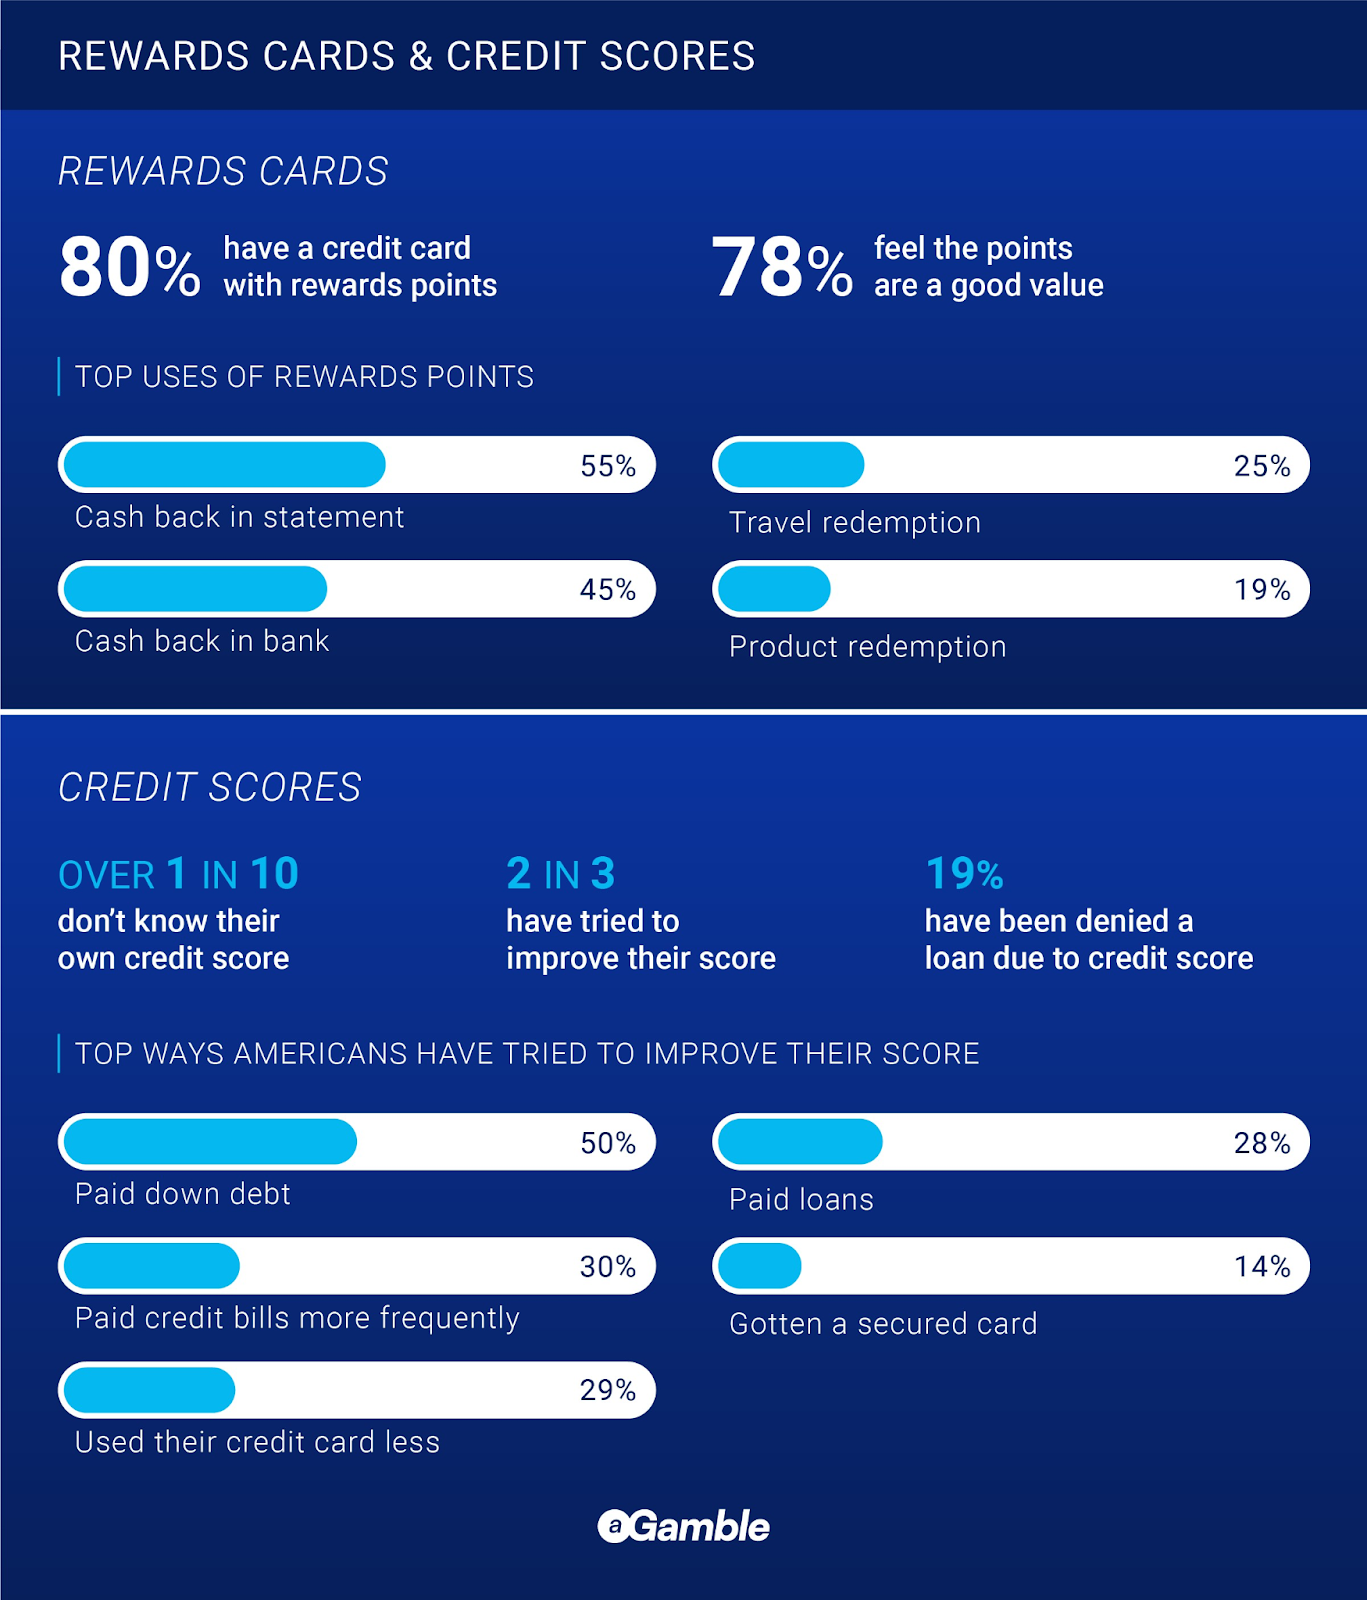 Statistics about rewards cards and credit scores, new survey data 2023 agamble.com